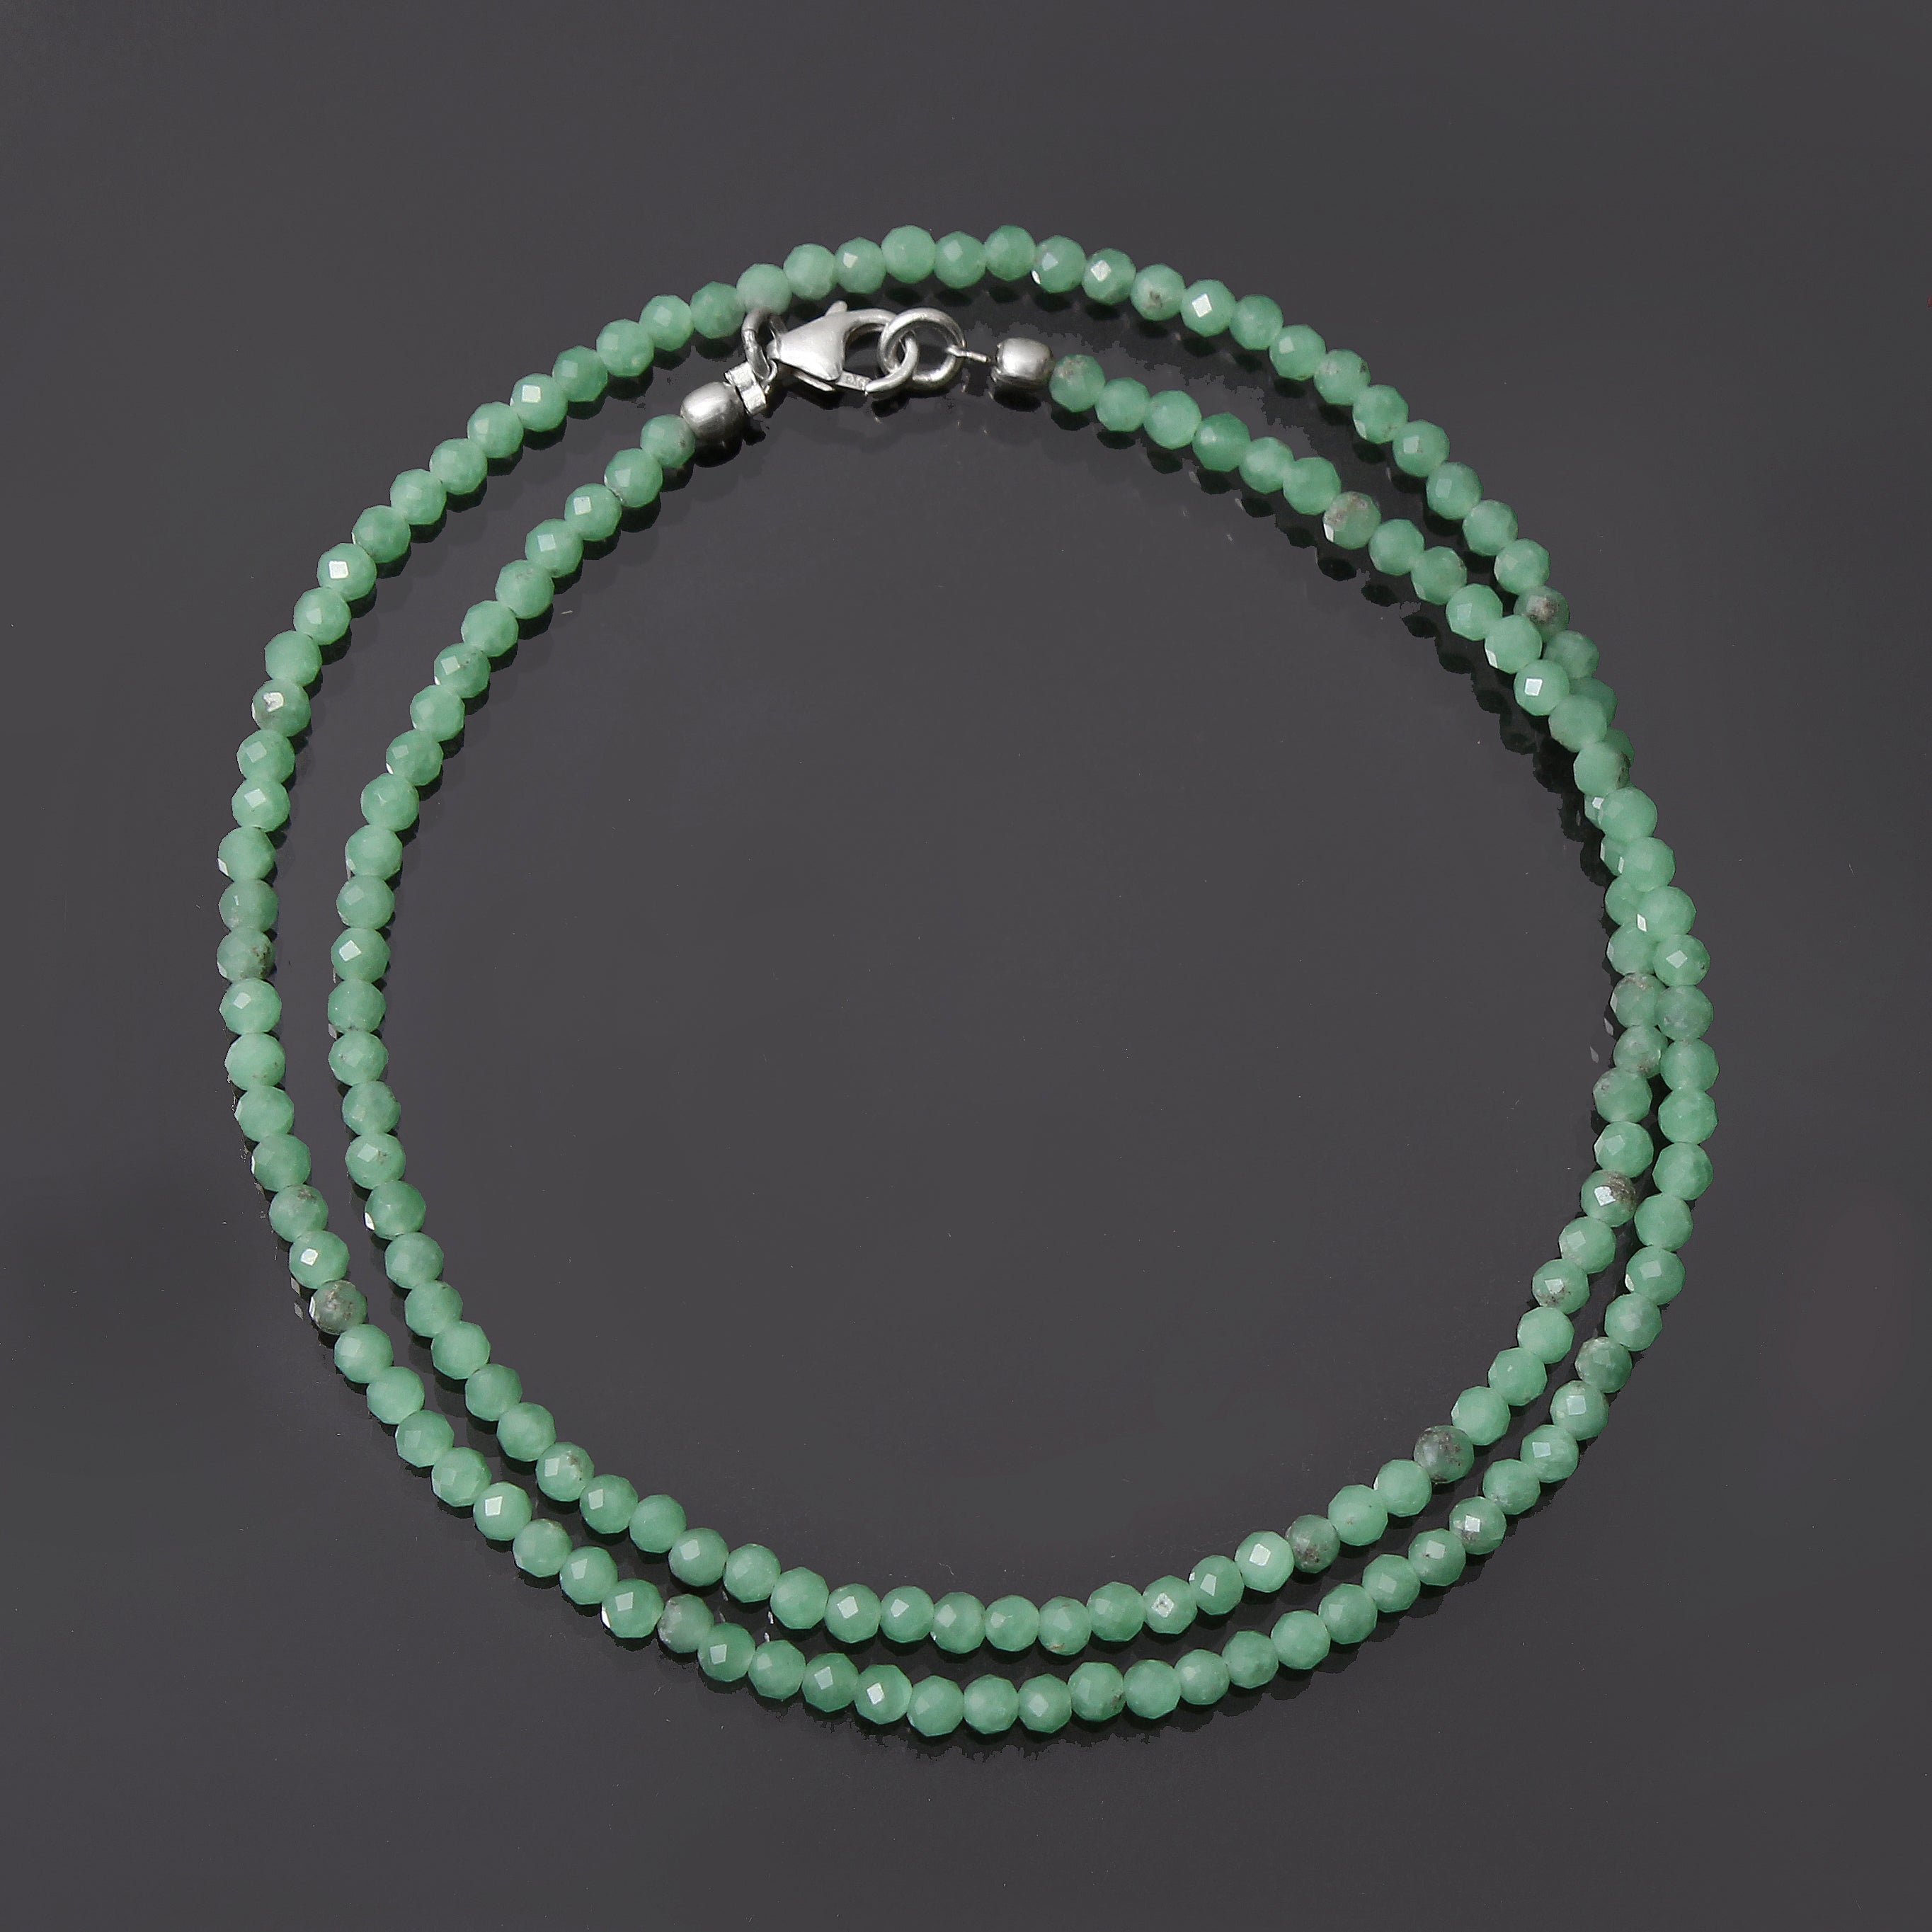 Green Jade Bead Bracelet – The Lilith store